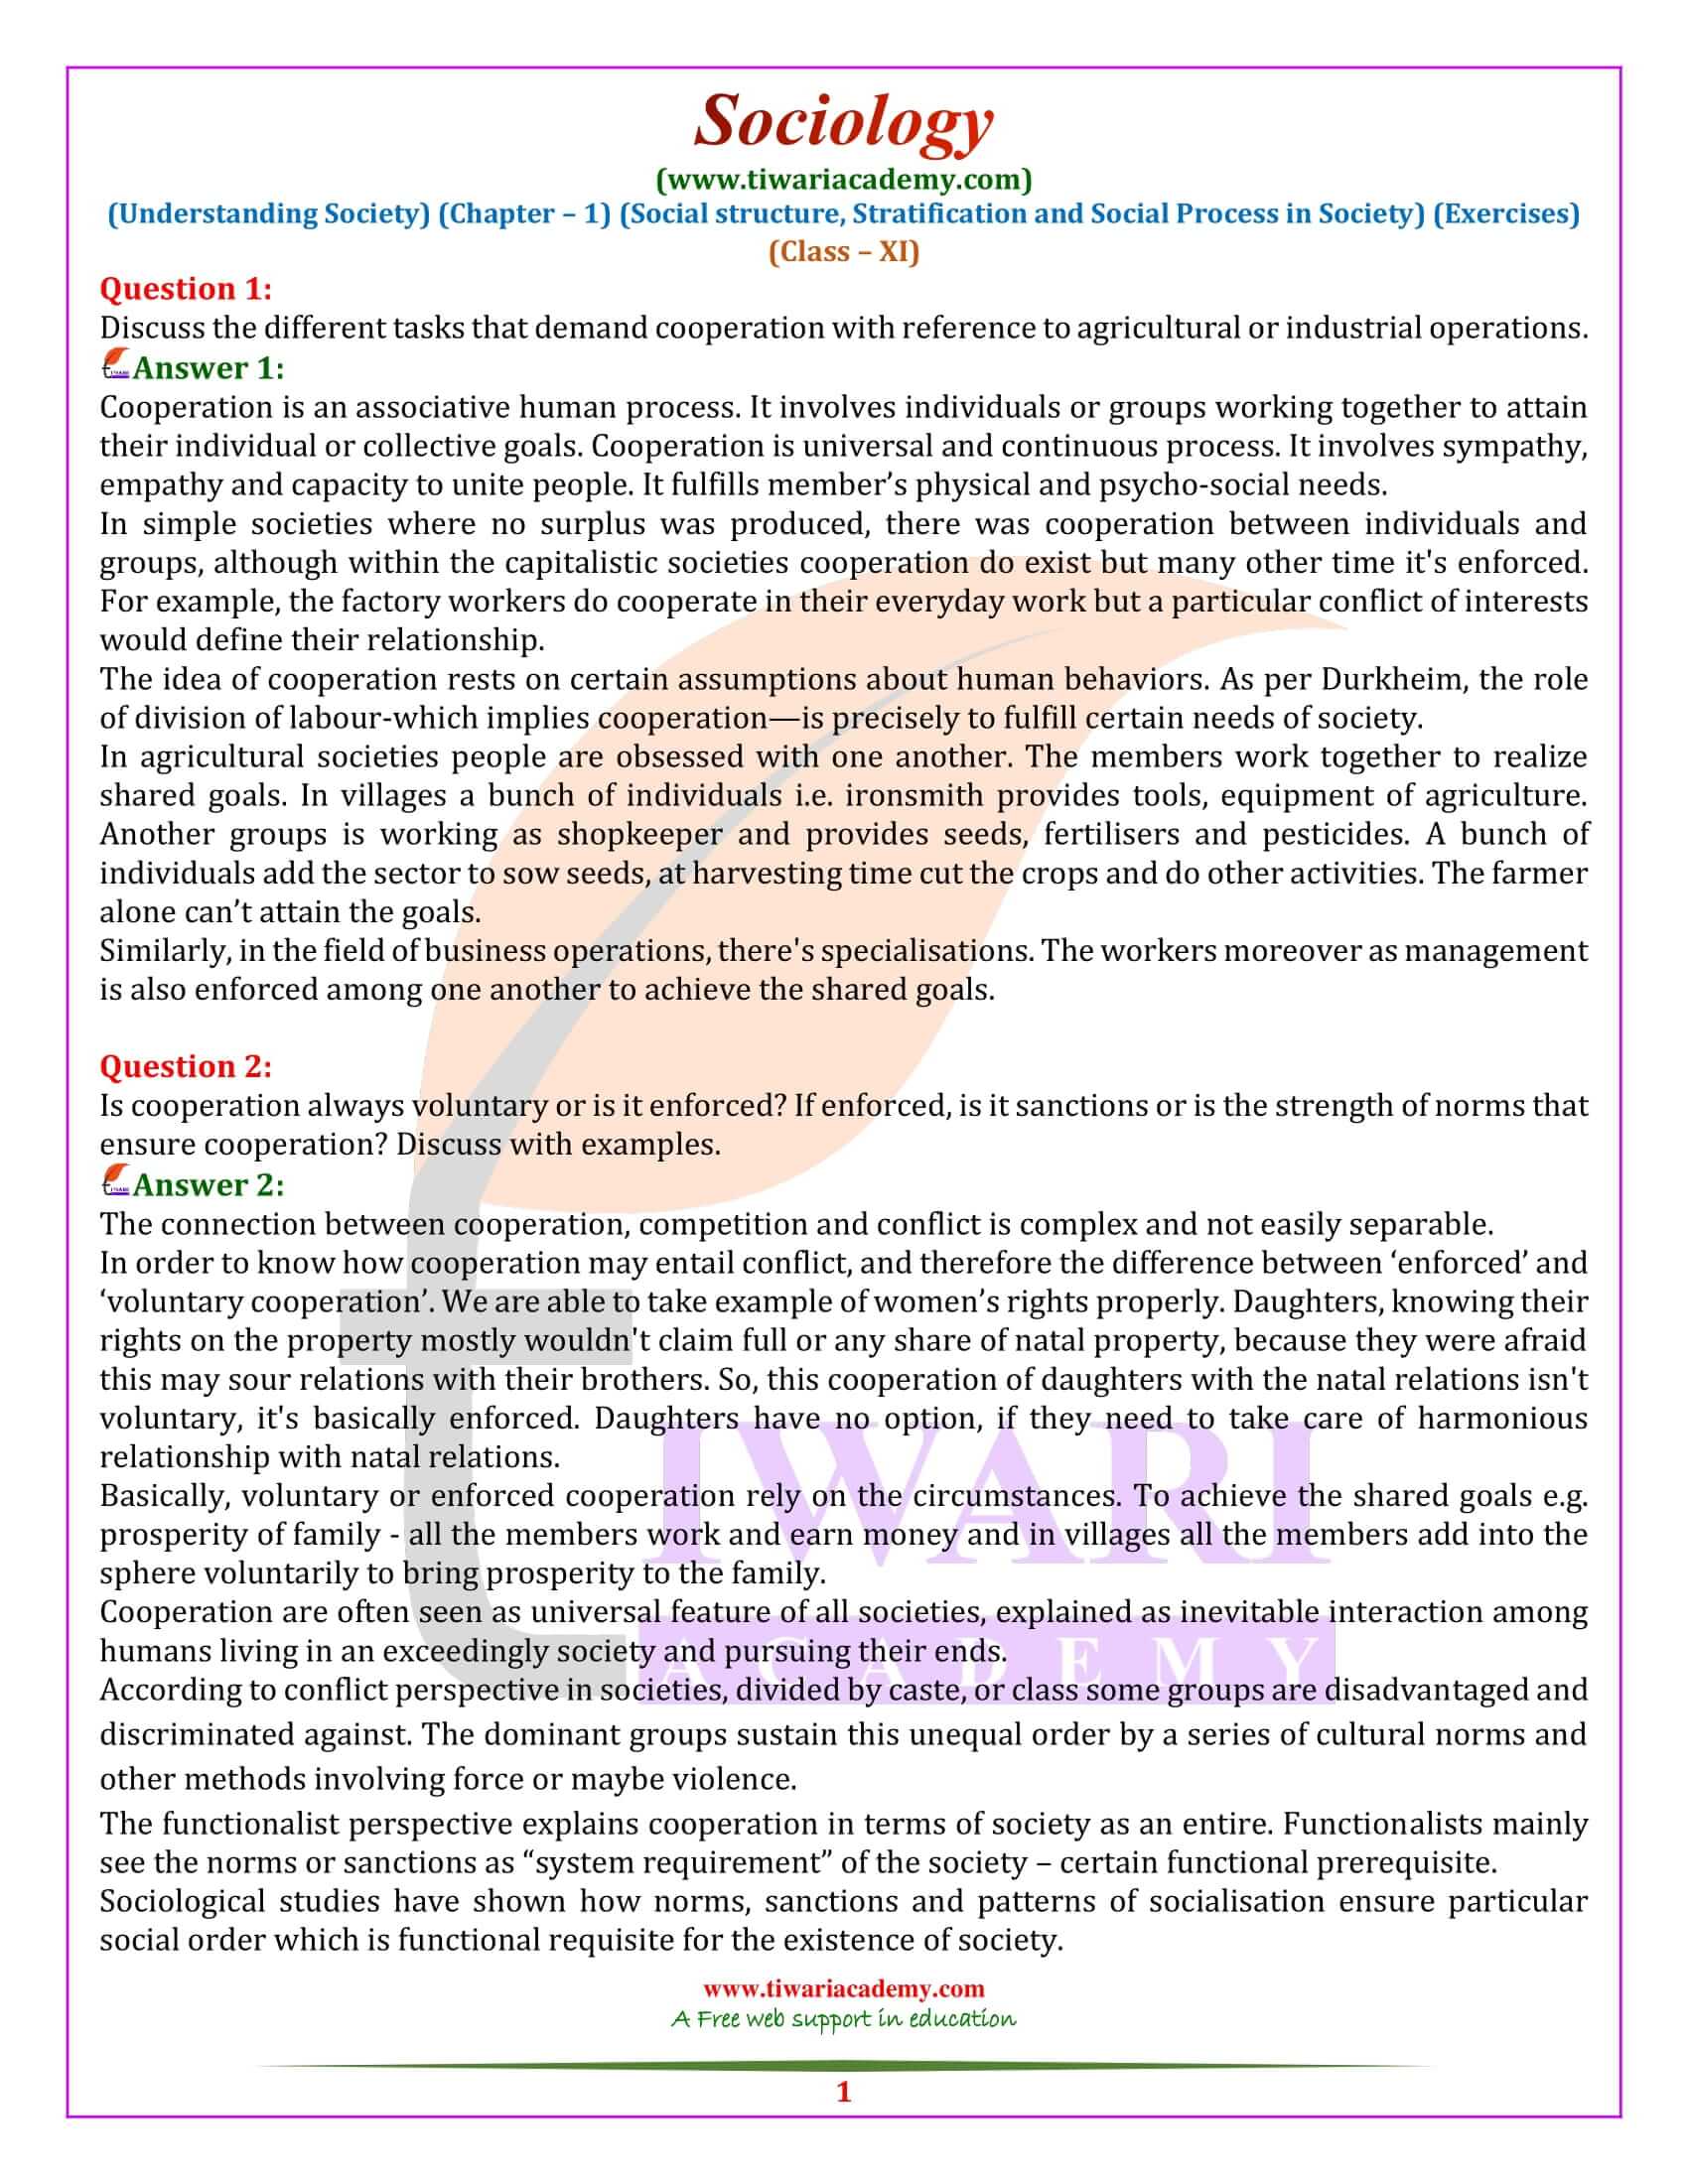 NCERT Solutions for Class 11 Sociology Chapter 1 Social Structure